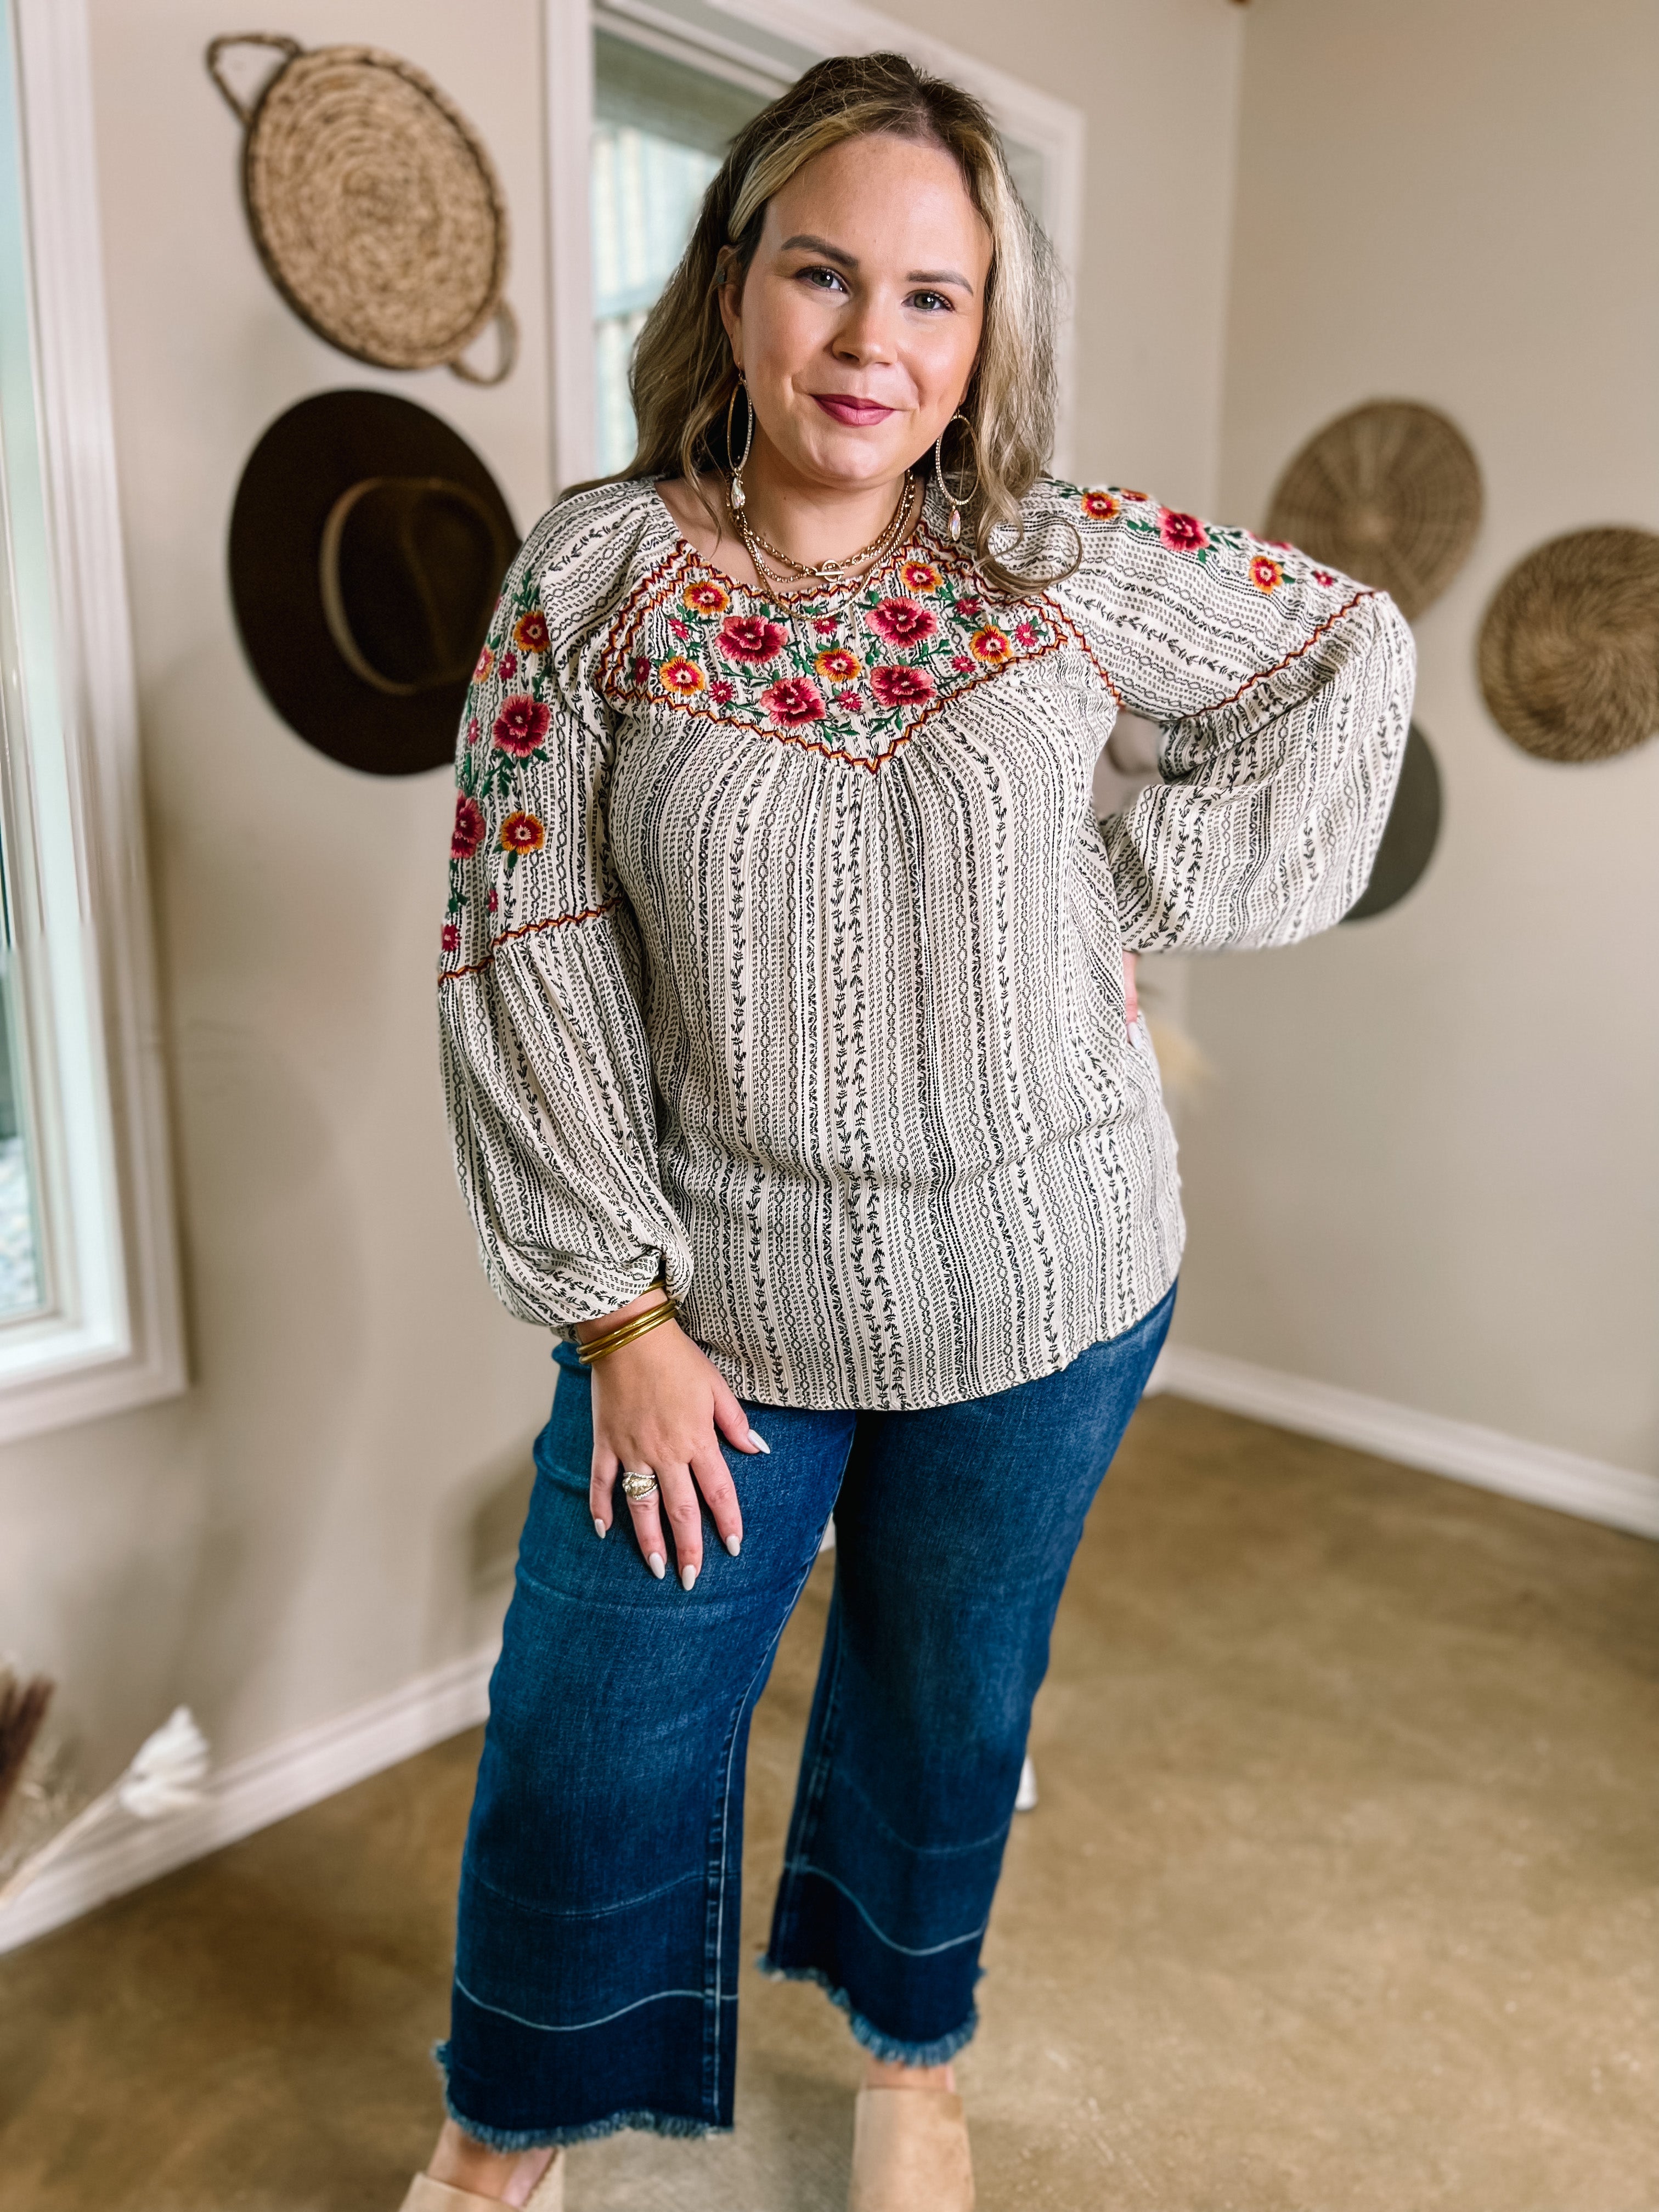 Savanna Jane | Looking For Peace Long Sleeve Tribal Print Floral Embroidered Top in Ivory - Giddy Up Glamour Boutique